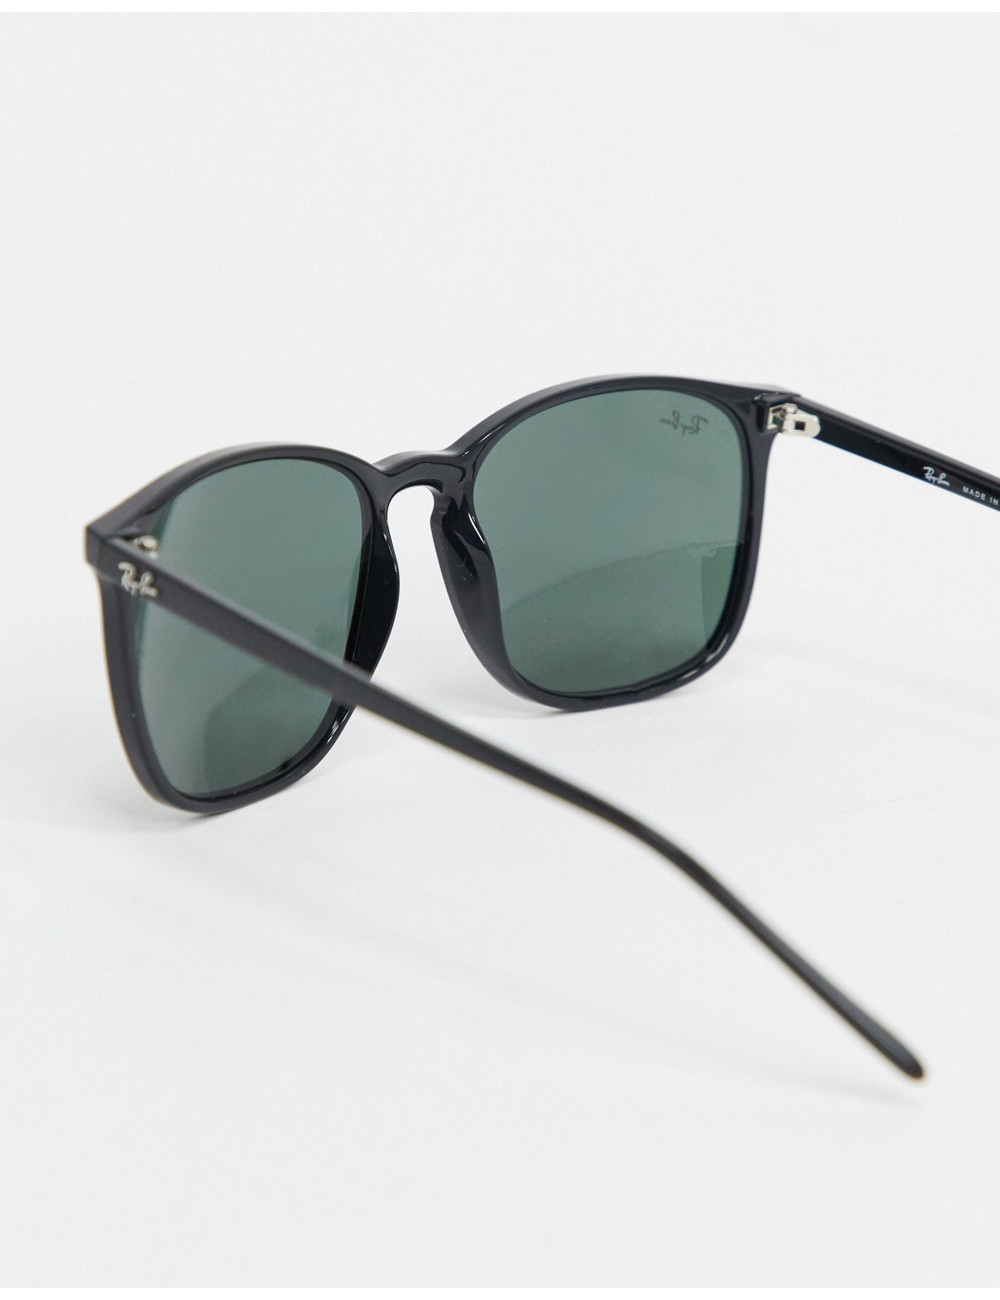 Ray-ban round sunglasses in...